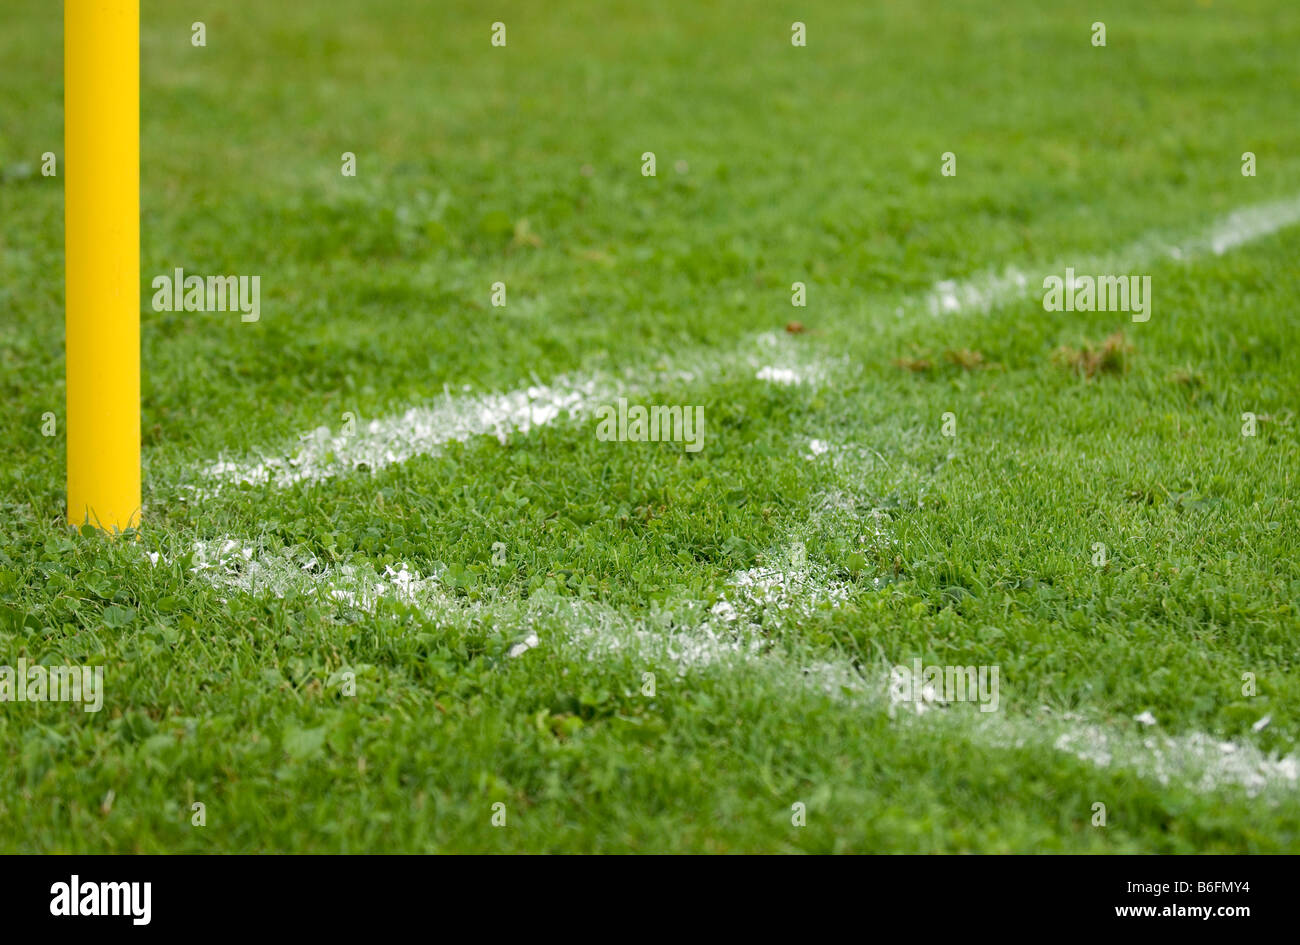 Corner flag on a football pitch in the local league, Bavaria, Germany, Europe Stock Photo